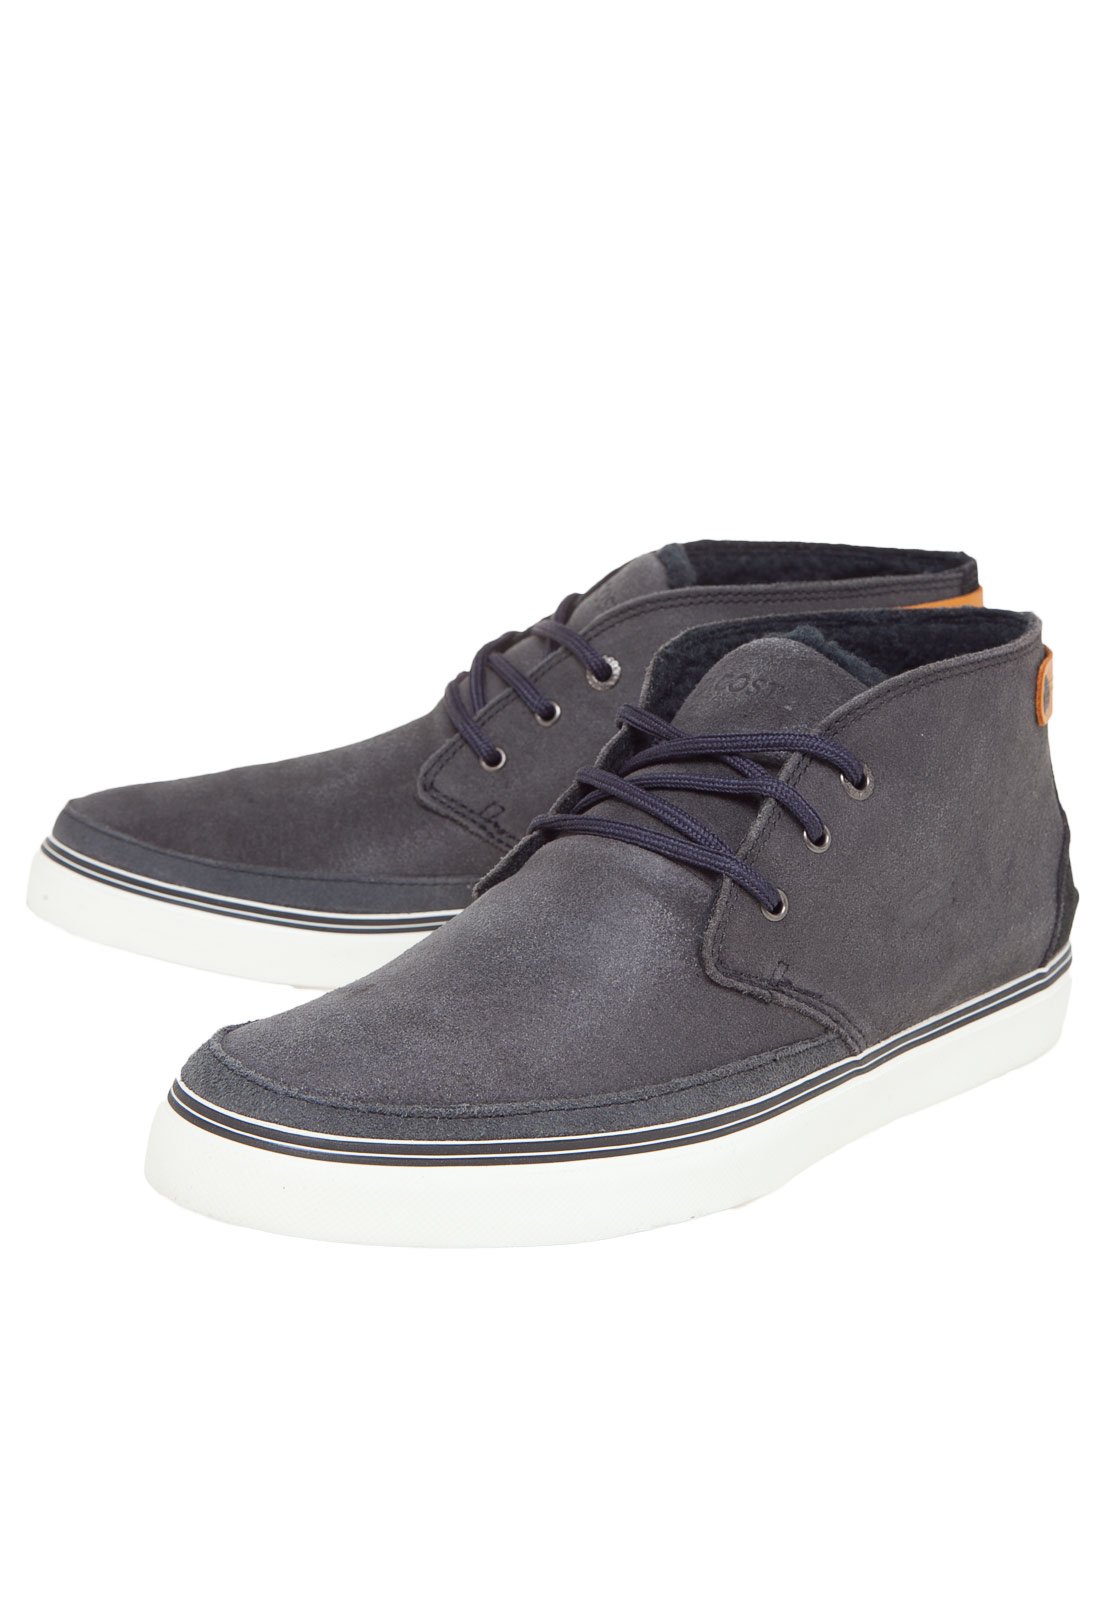 Buy Sapatos Masculinos Cano Medio | UP TO 50% OFF